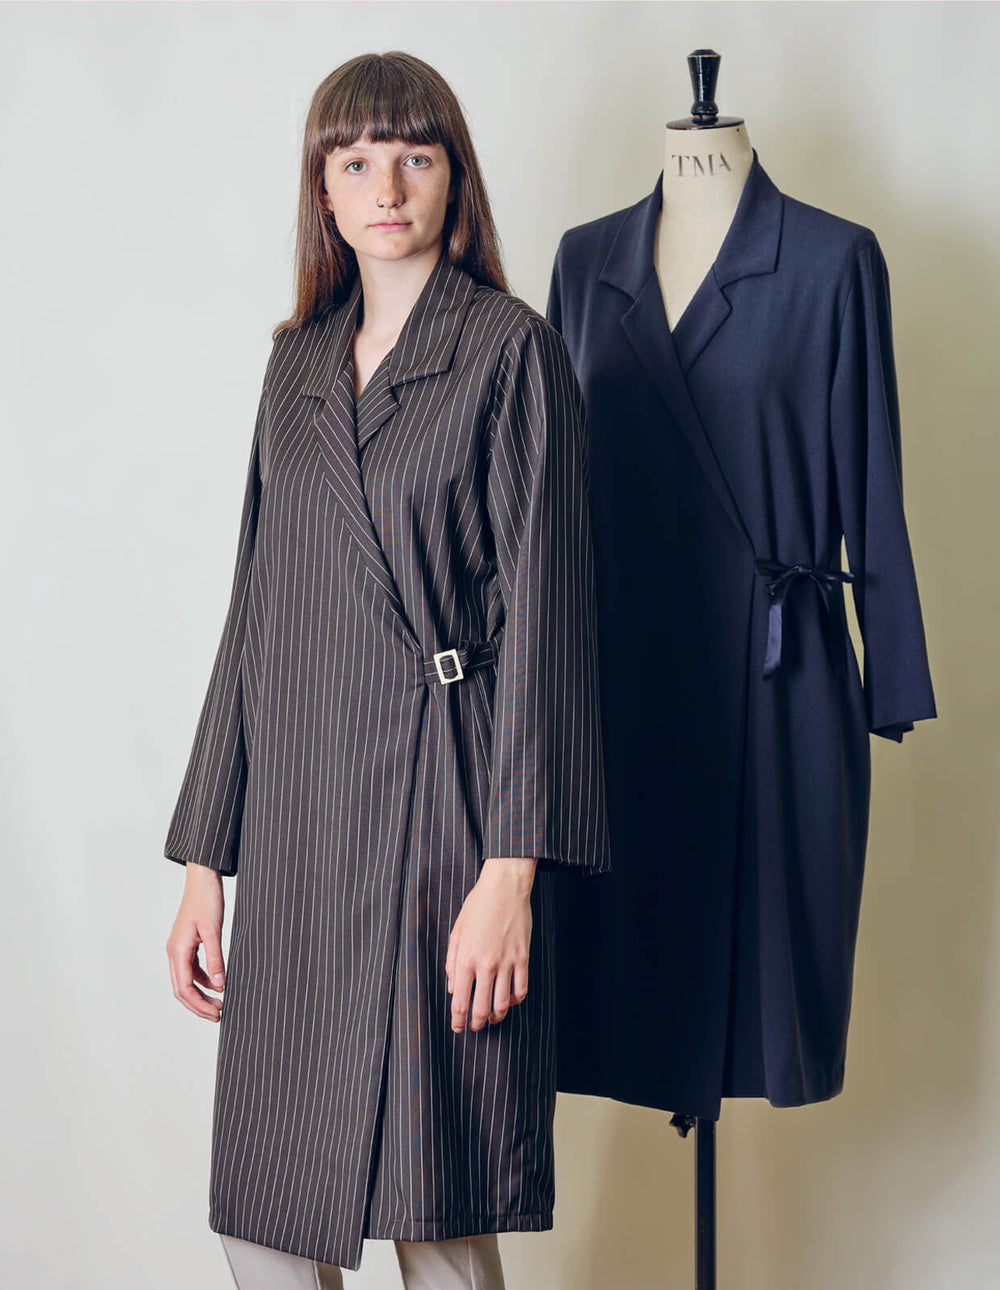 Woman wearing the Woven Wrap Dress sewing pattern from The Maker's Atelier on The Fold Line. A wrap dress pattern made in wool, denim, silk, linen or viscose fabrics, featuring a self-fabric strap and buckle closure, asymmetric hem, long sleeves, relaxed 